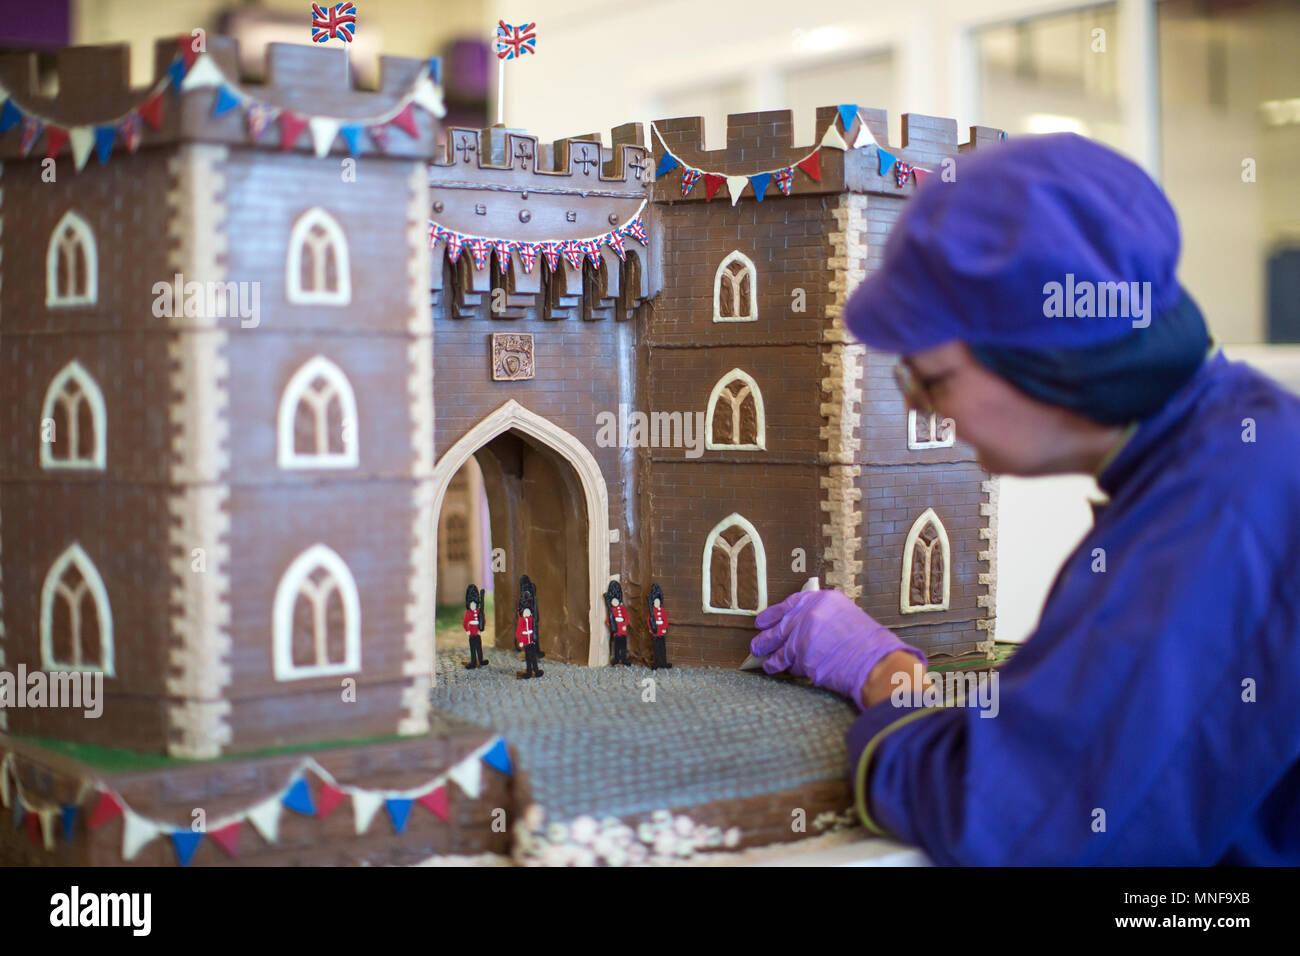 A chocolatier pipes the finishing touches onto the front of Windsor Castle at Cadbury World in Birmingham, which is made entirely out of chocolate and includes the Henry VIII gate with a hand-piped picture of St George's Chapel visible through it, ahead of the royal wedding this weekend. Stock Photo